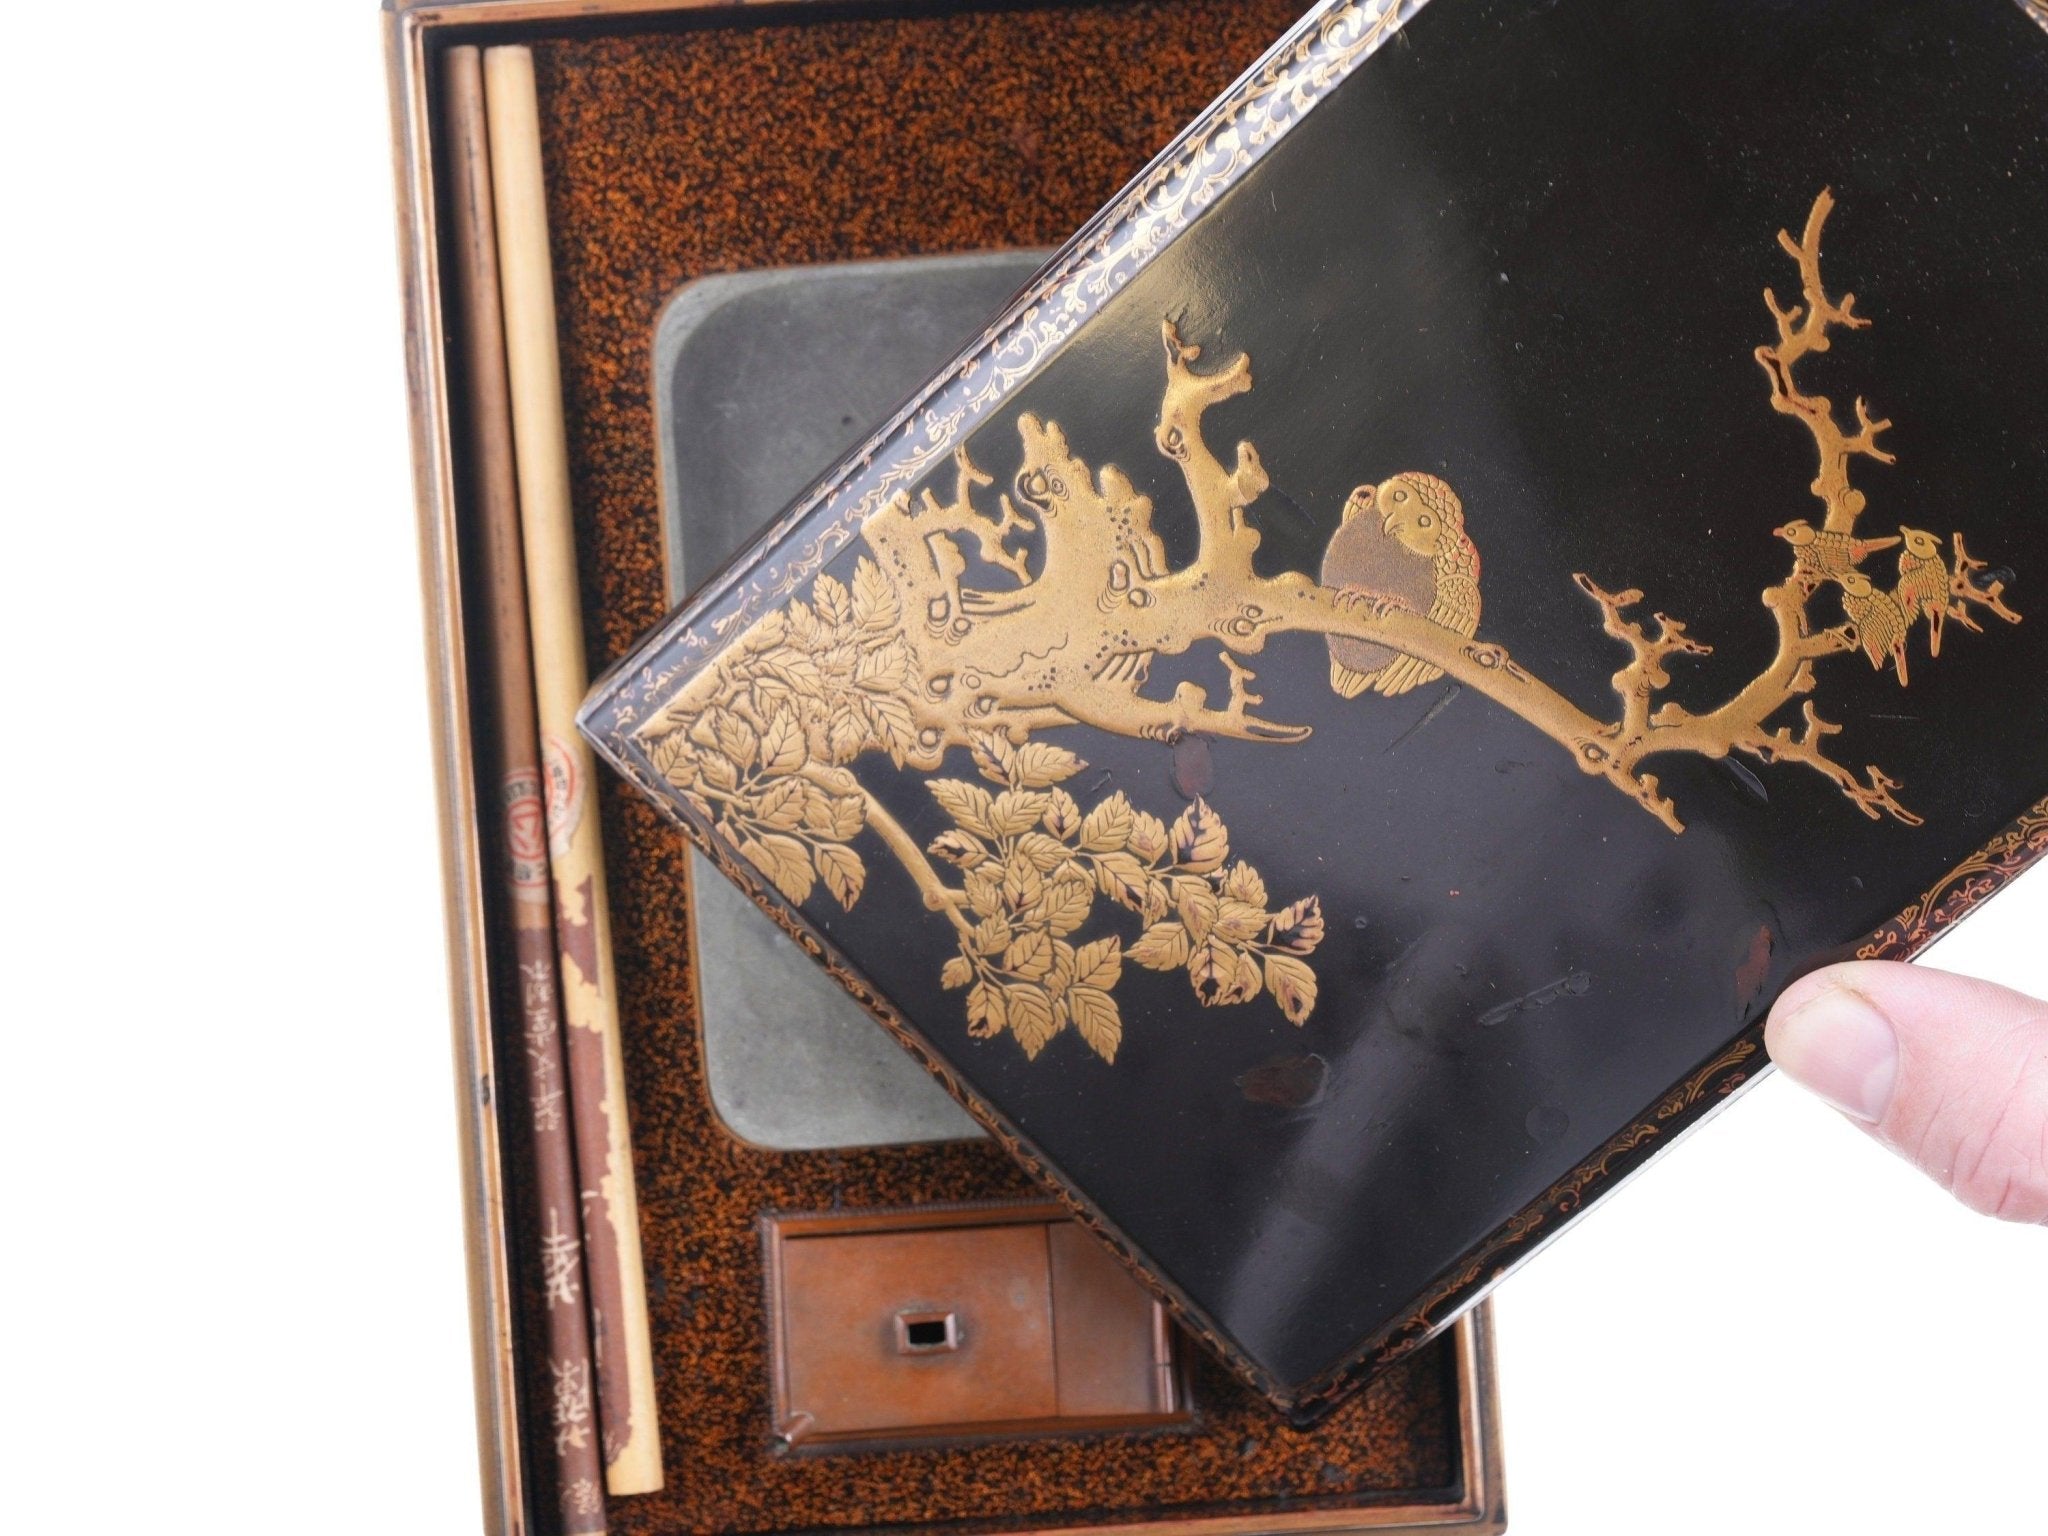 Antique Japanese Black-Lacquer Suzuribako (Writing Box) and Cover 